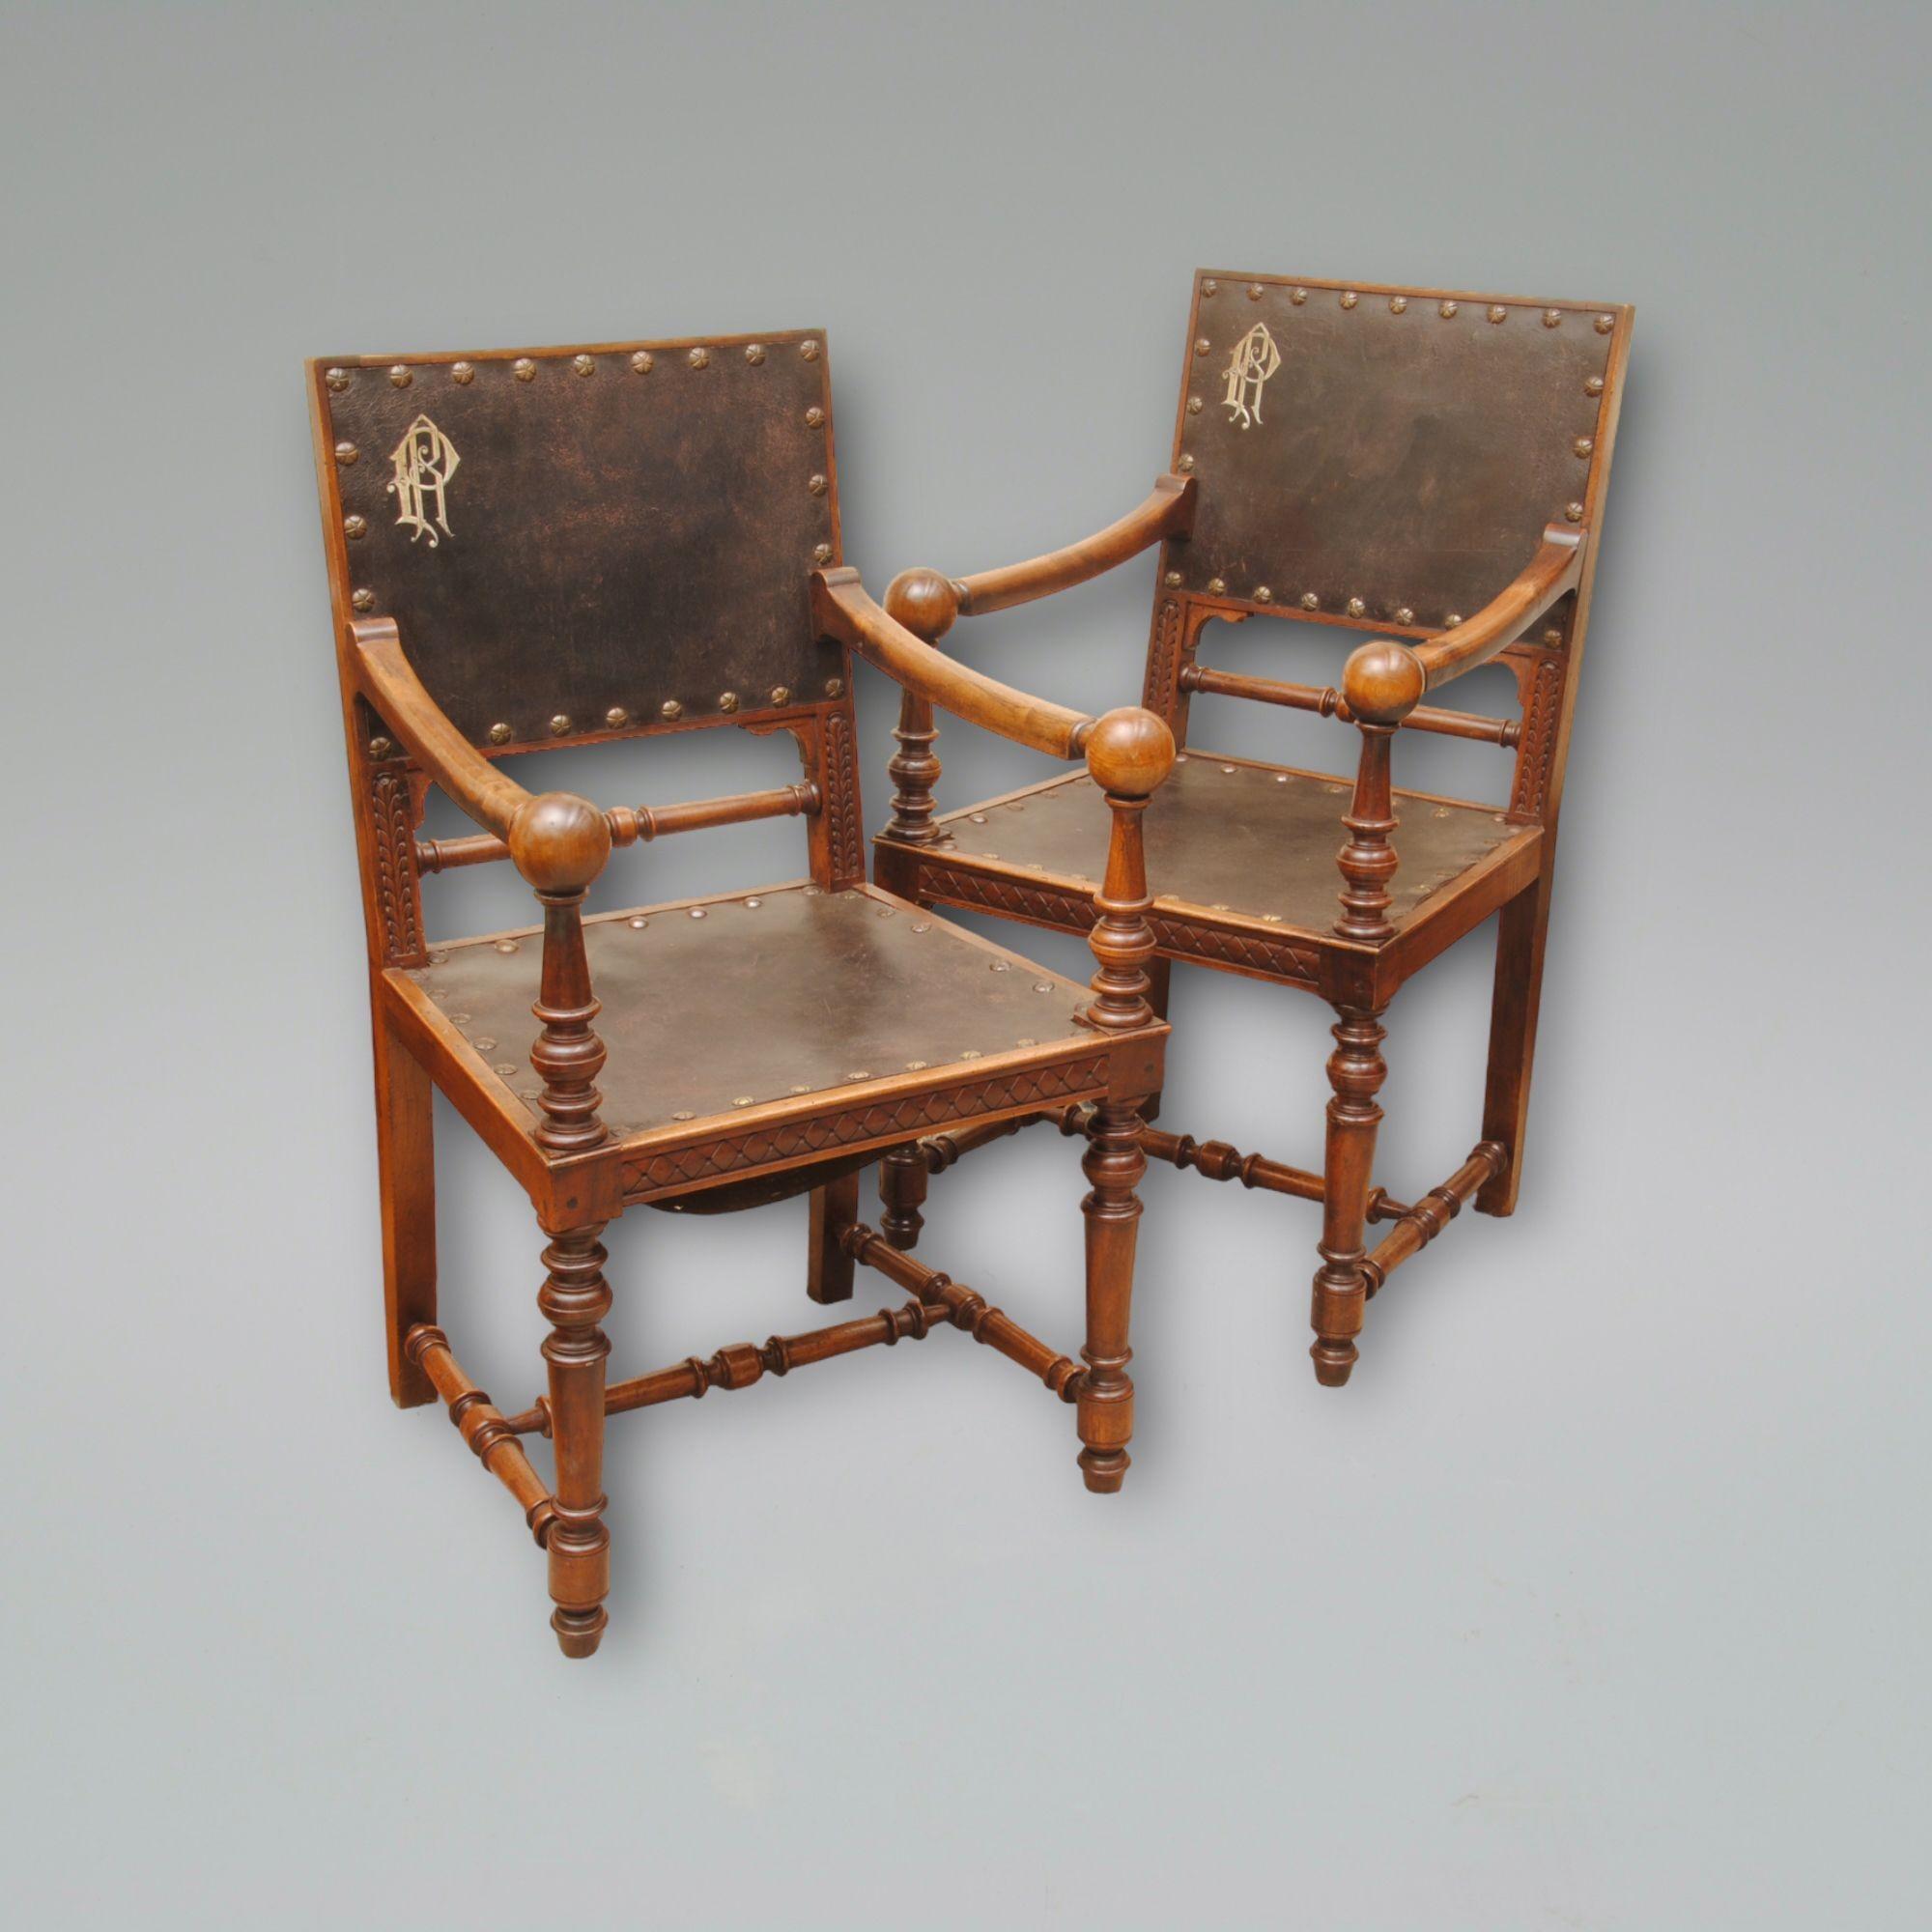 A pair of walnut and leather upholstered French armchairs with turned legs and balls at the end of the arms, good colour, and patina.
Circa 1850